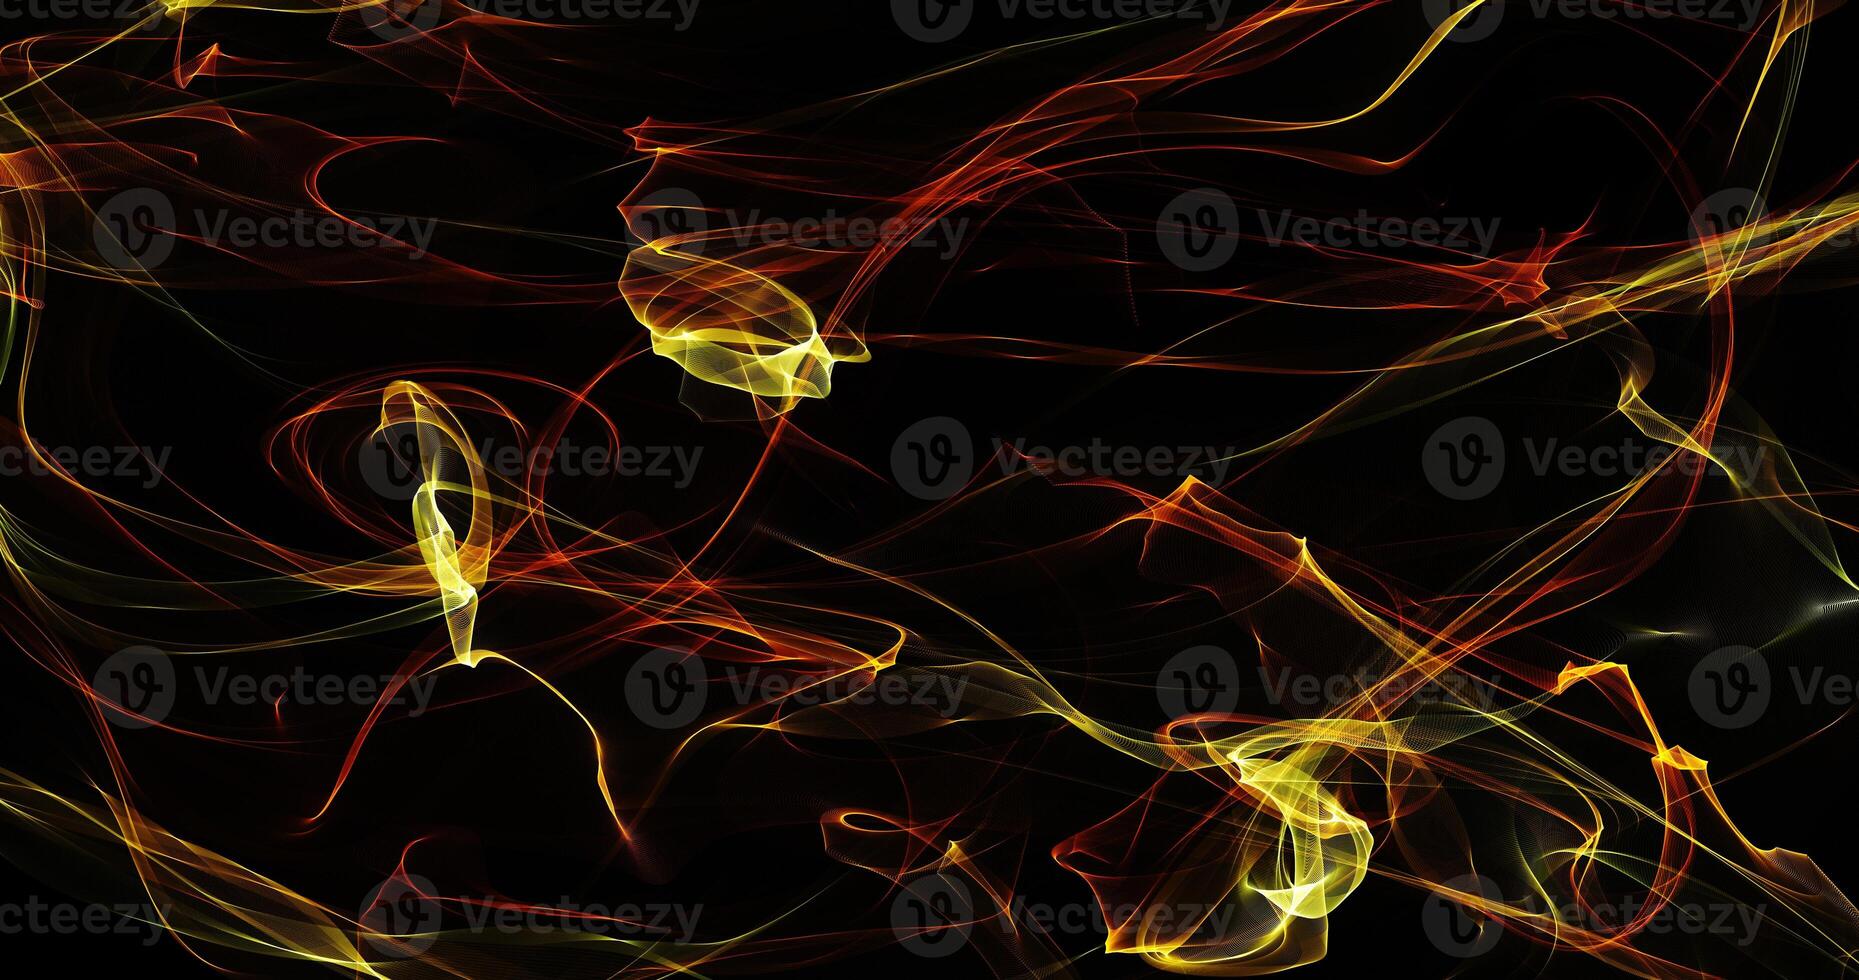 Abstract Flame-Like Patterns On Dark Background photo